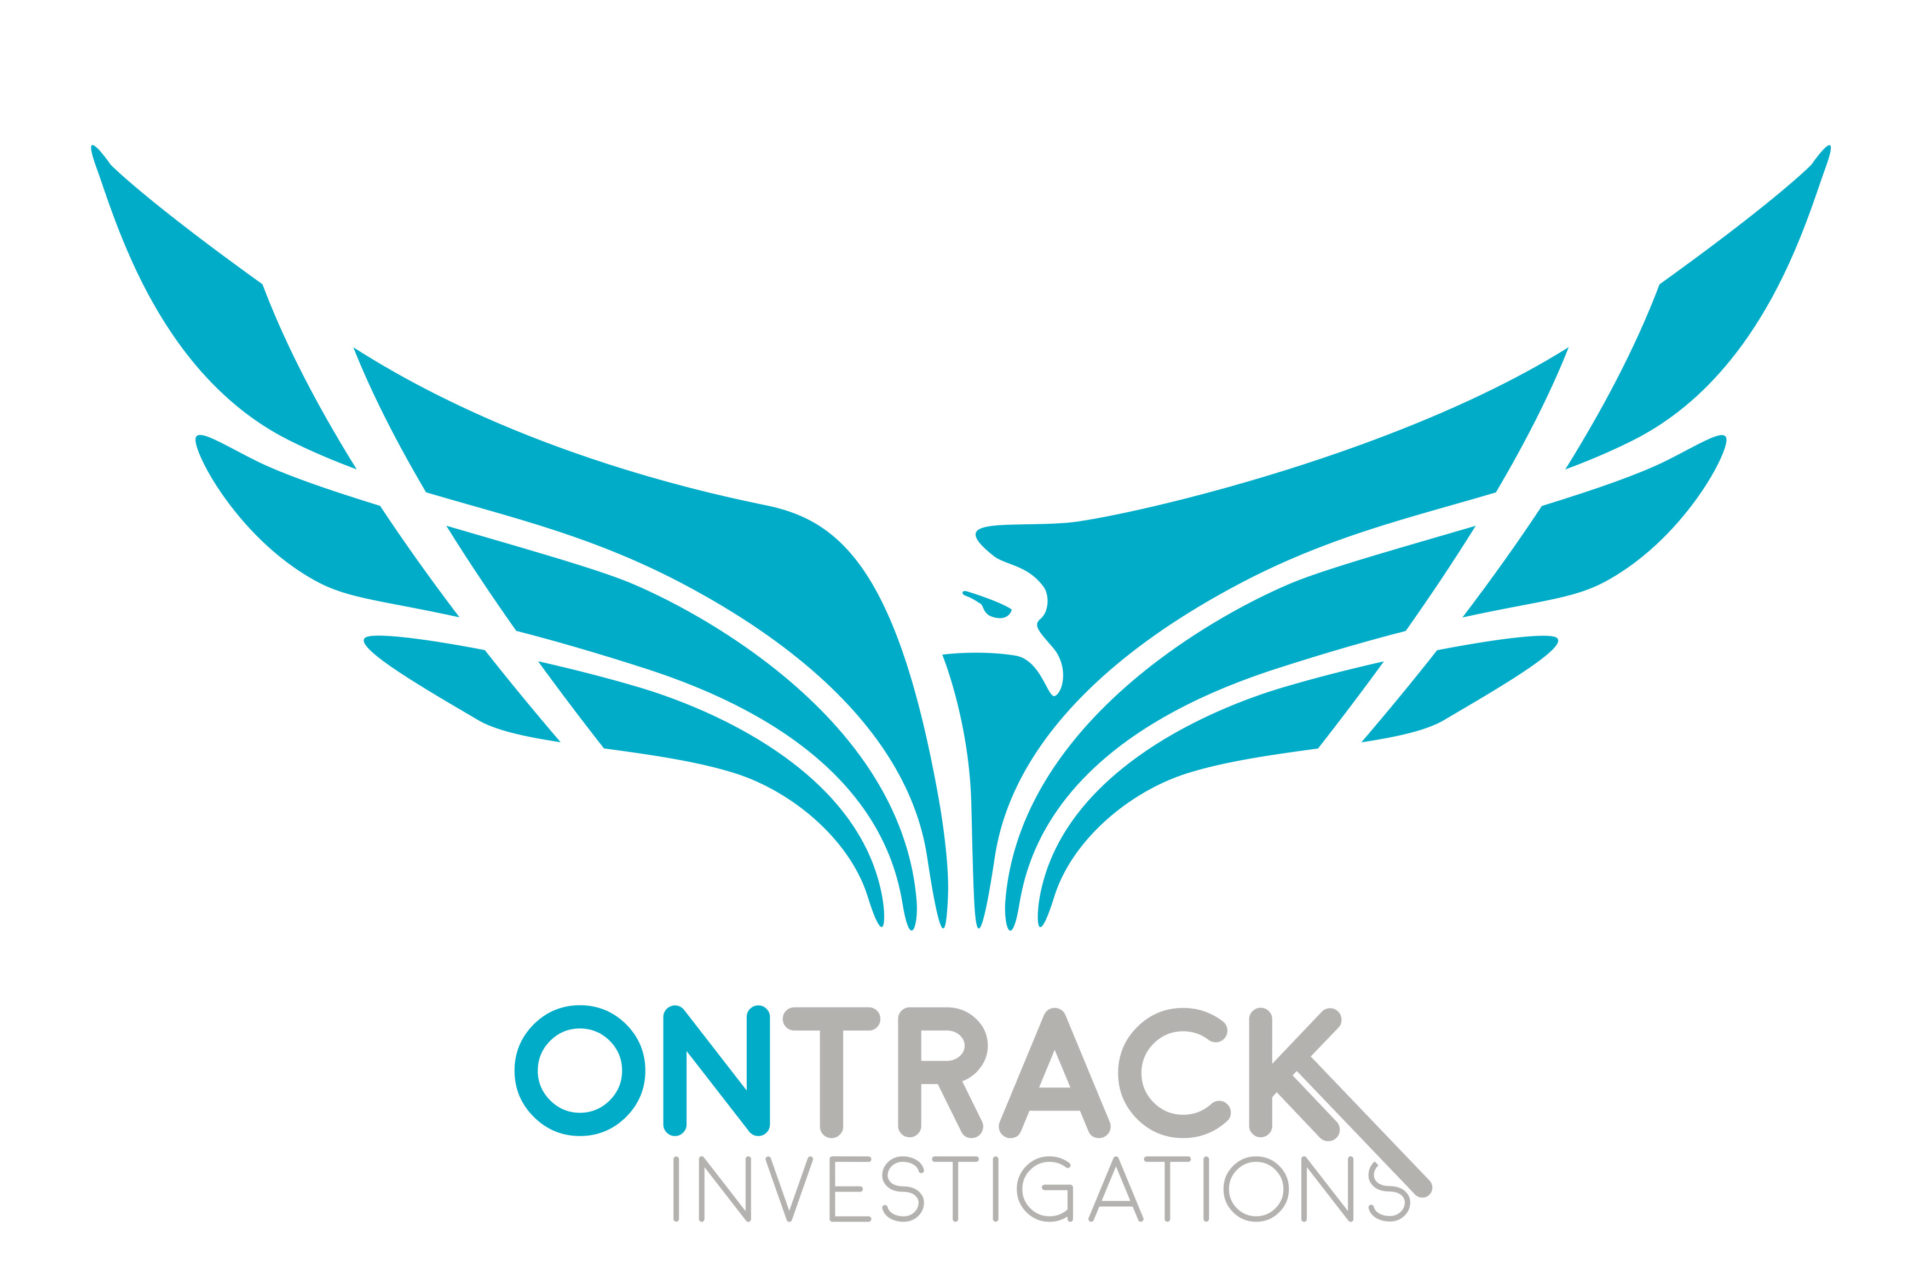 On Track Investigations